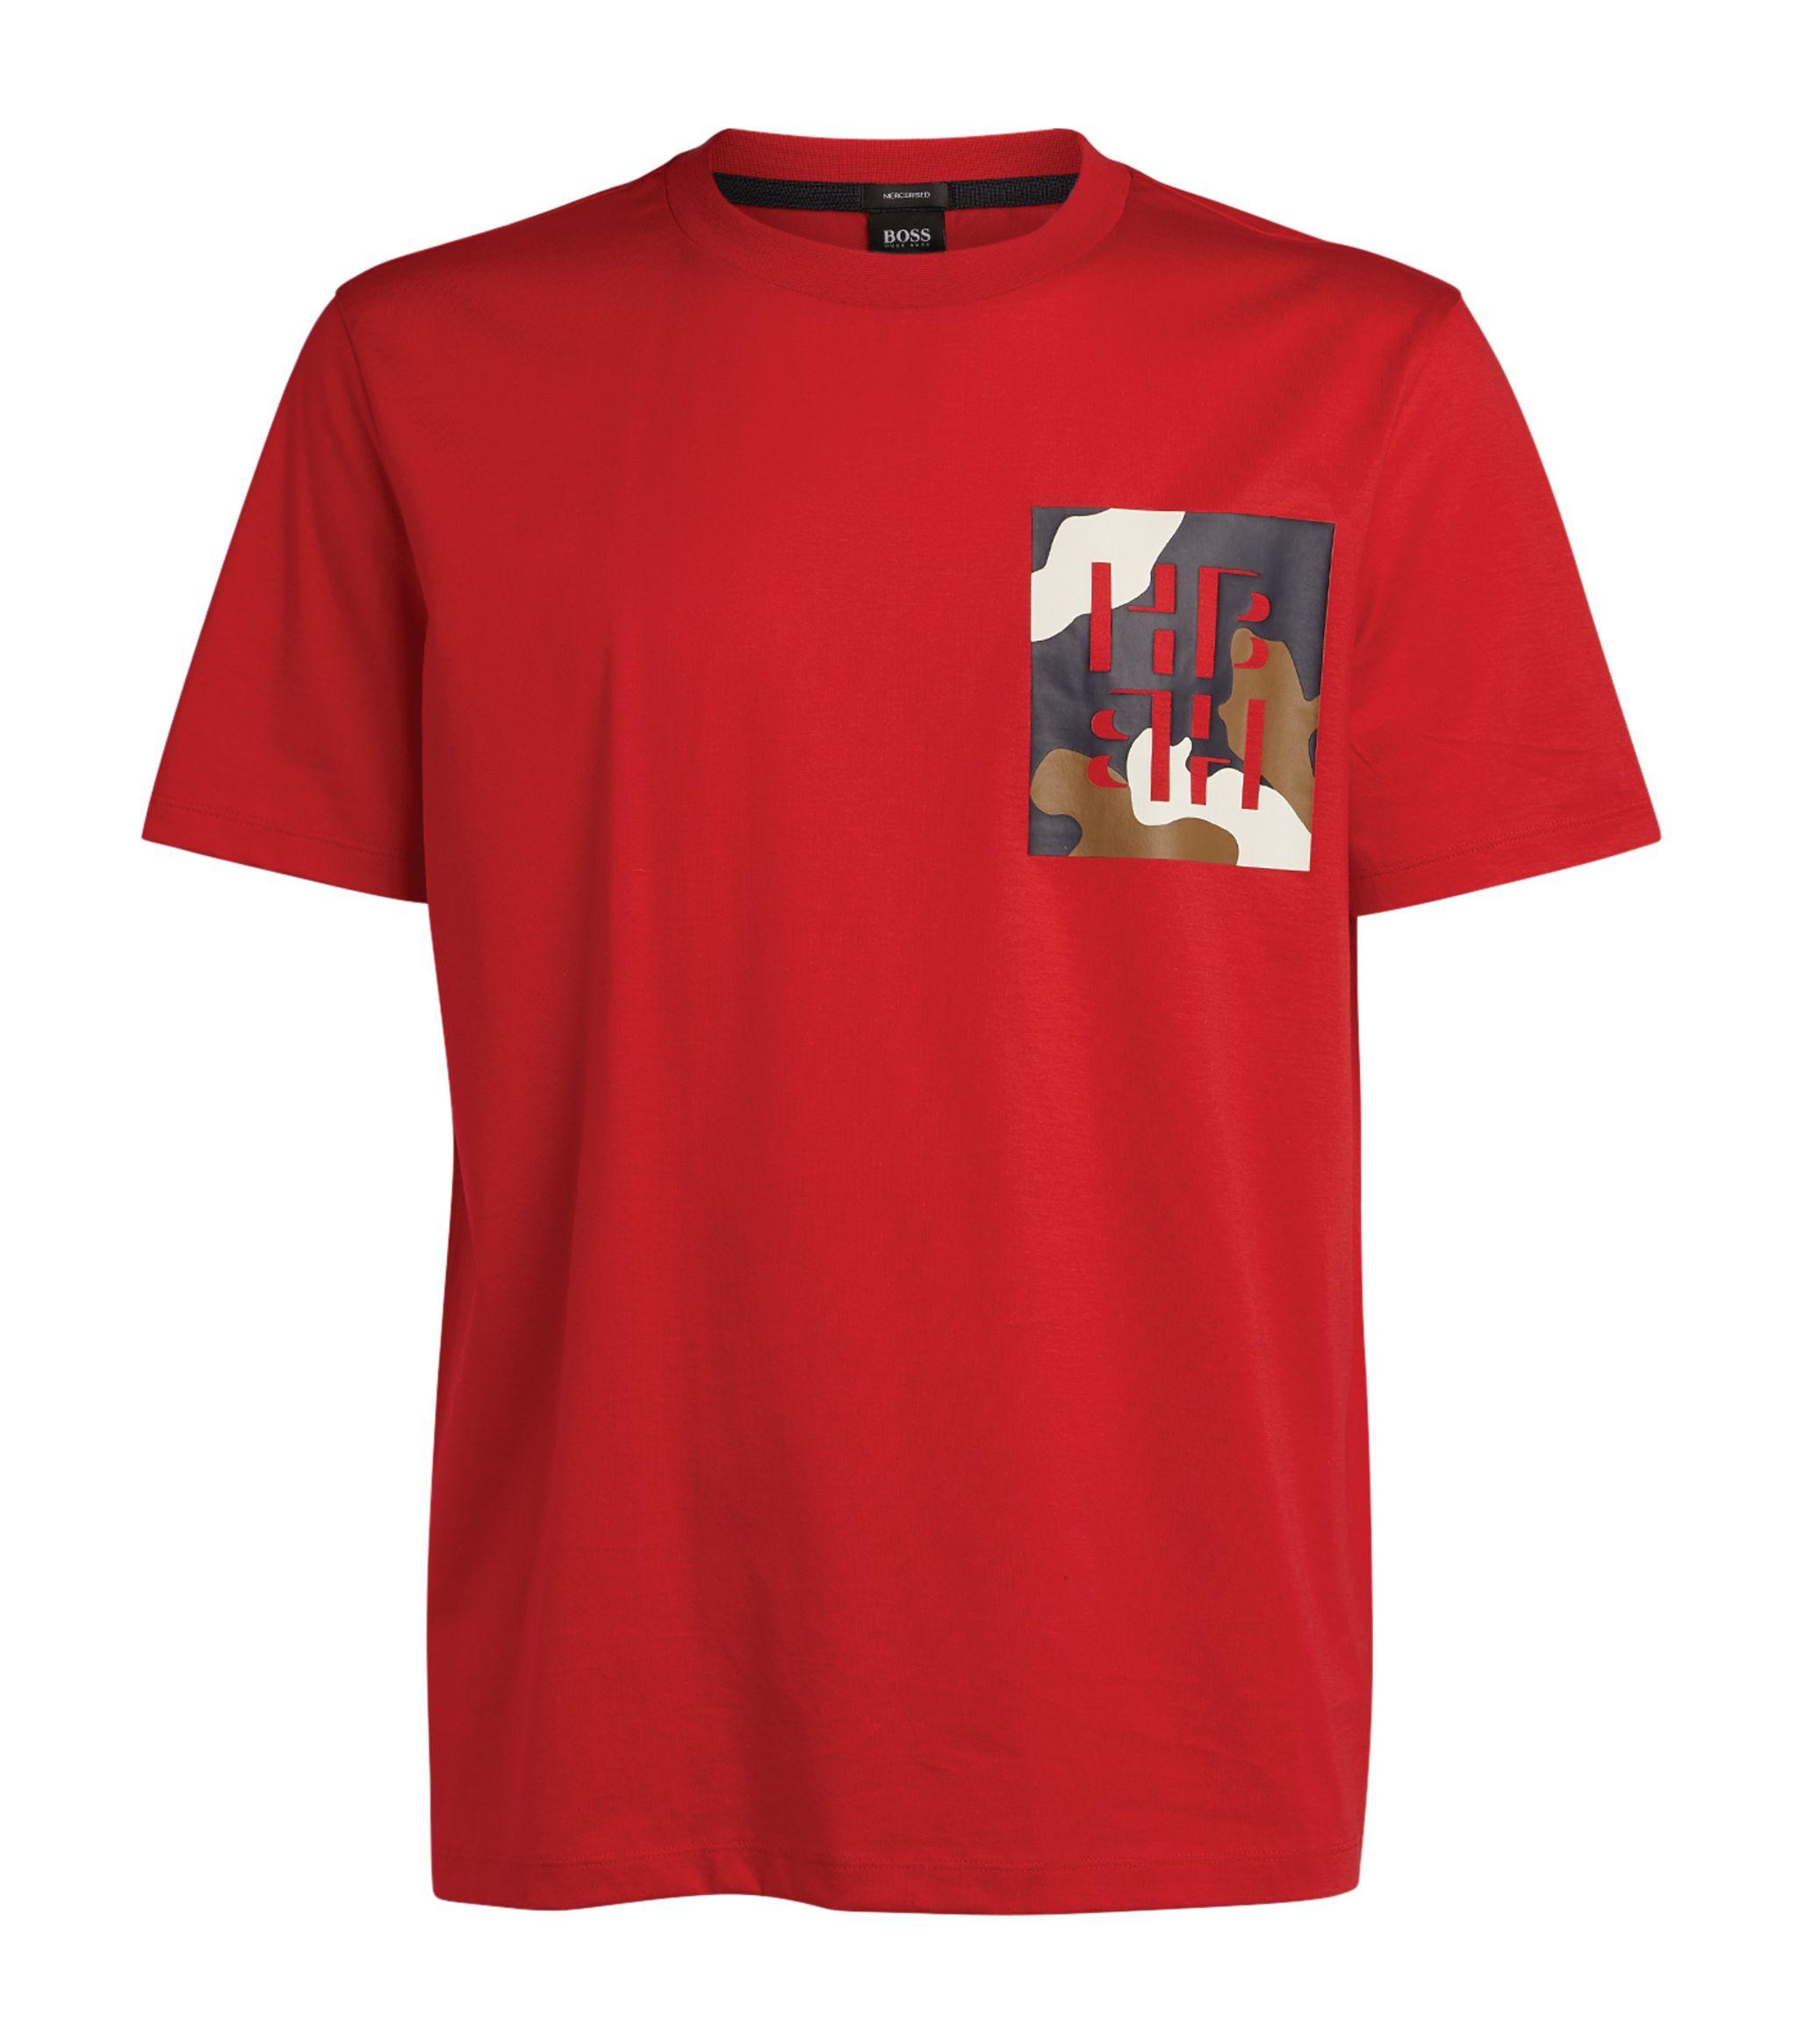 BOSS by Hugo Boss Cotton Camouflage Logo T-shirt in Red for Men - Lyst